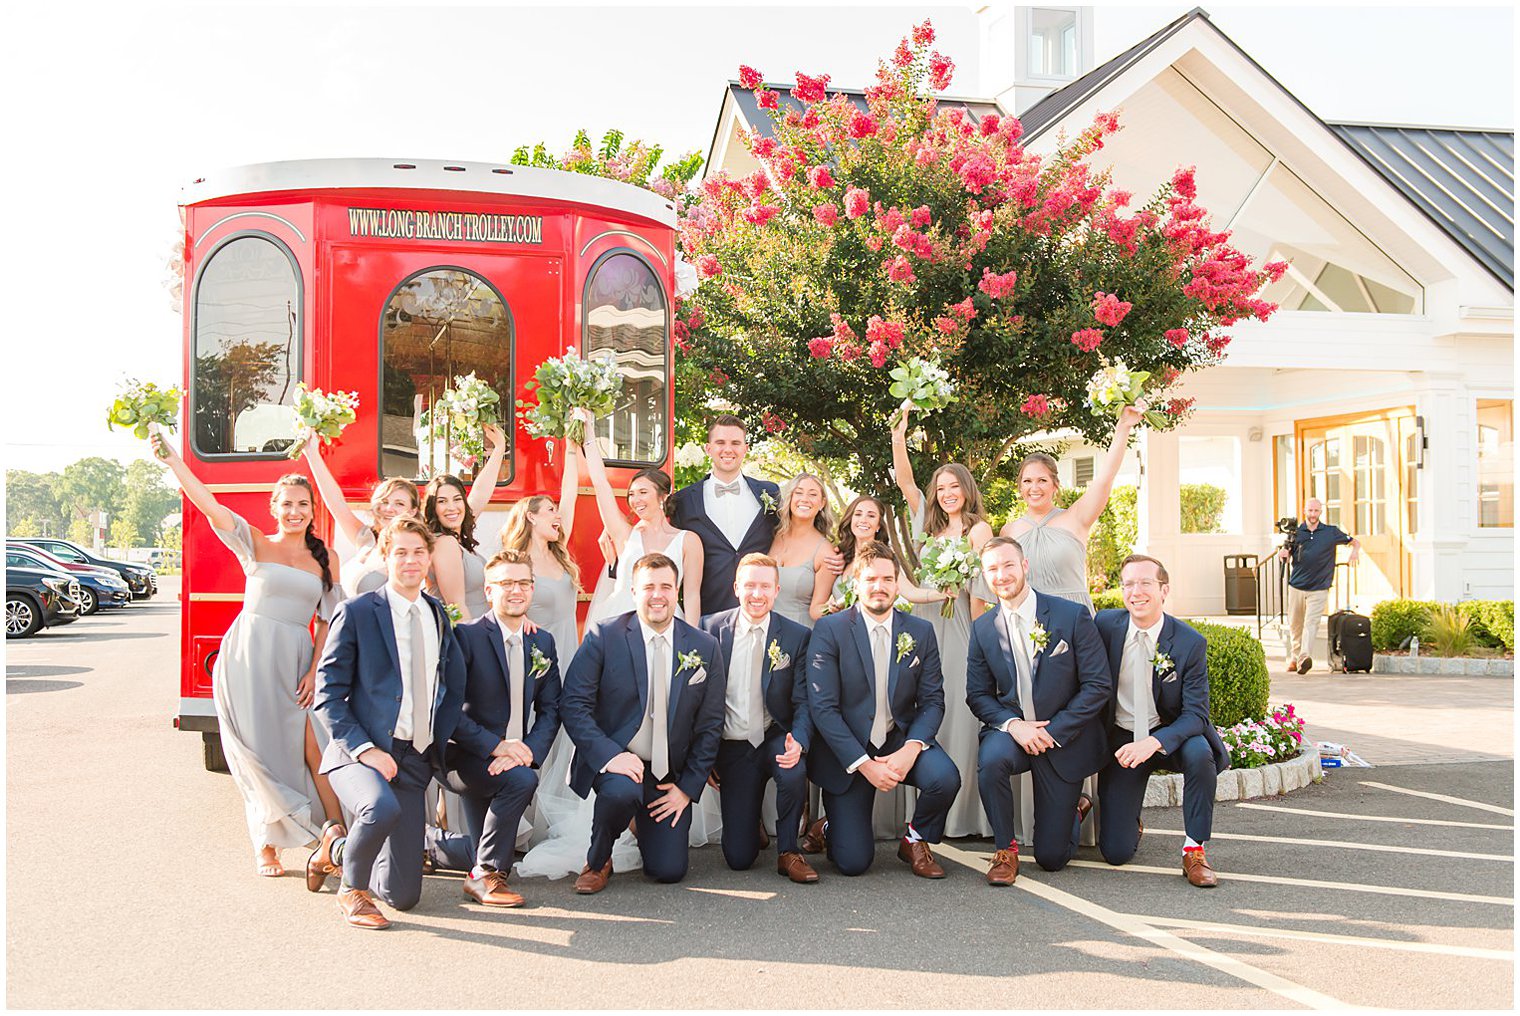 bride and groom pose with wedding party outside red trolley